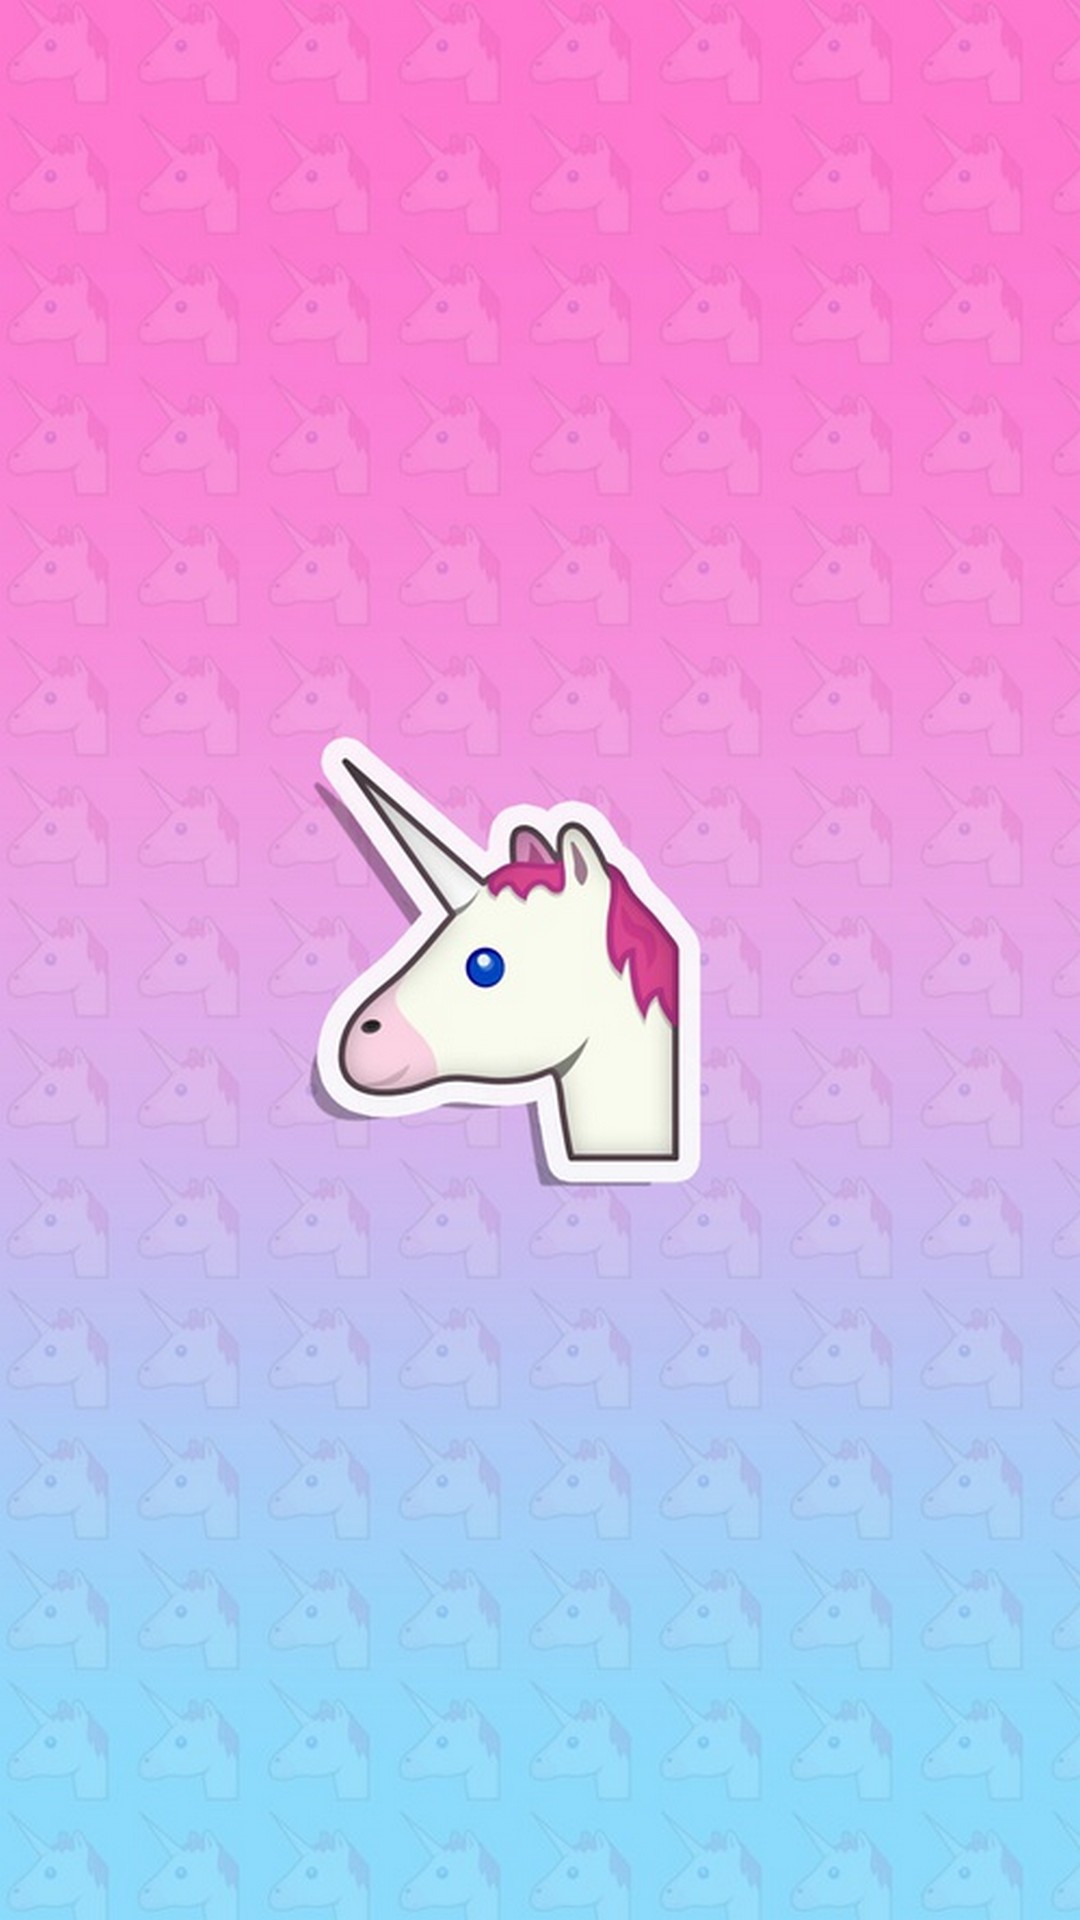 Wallpapers Phone Cute Girly Unicorn 2020 Android Wallpapers